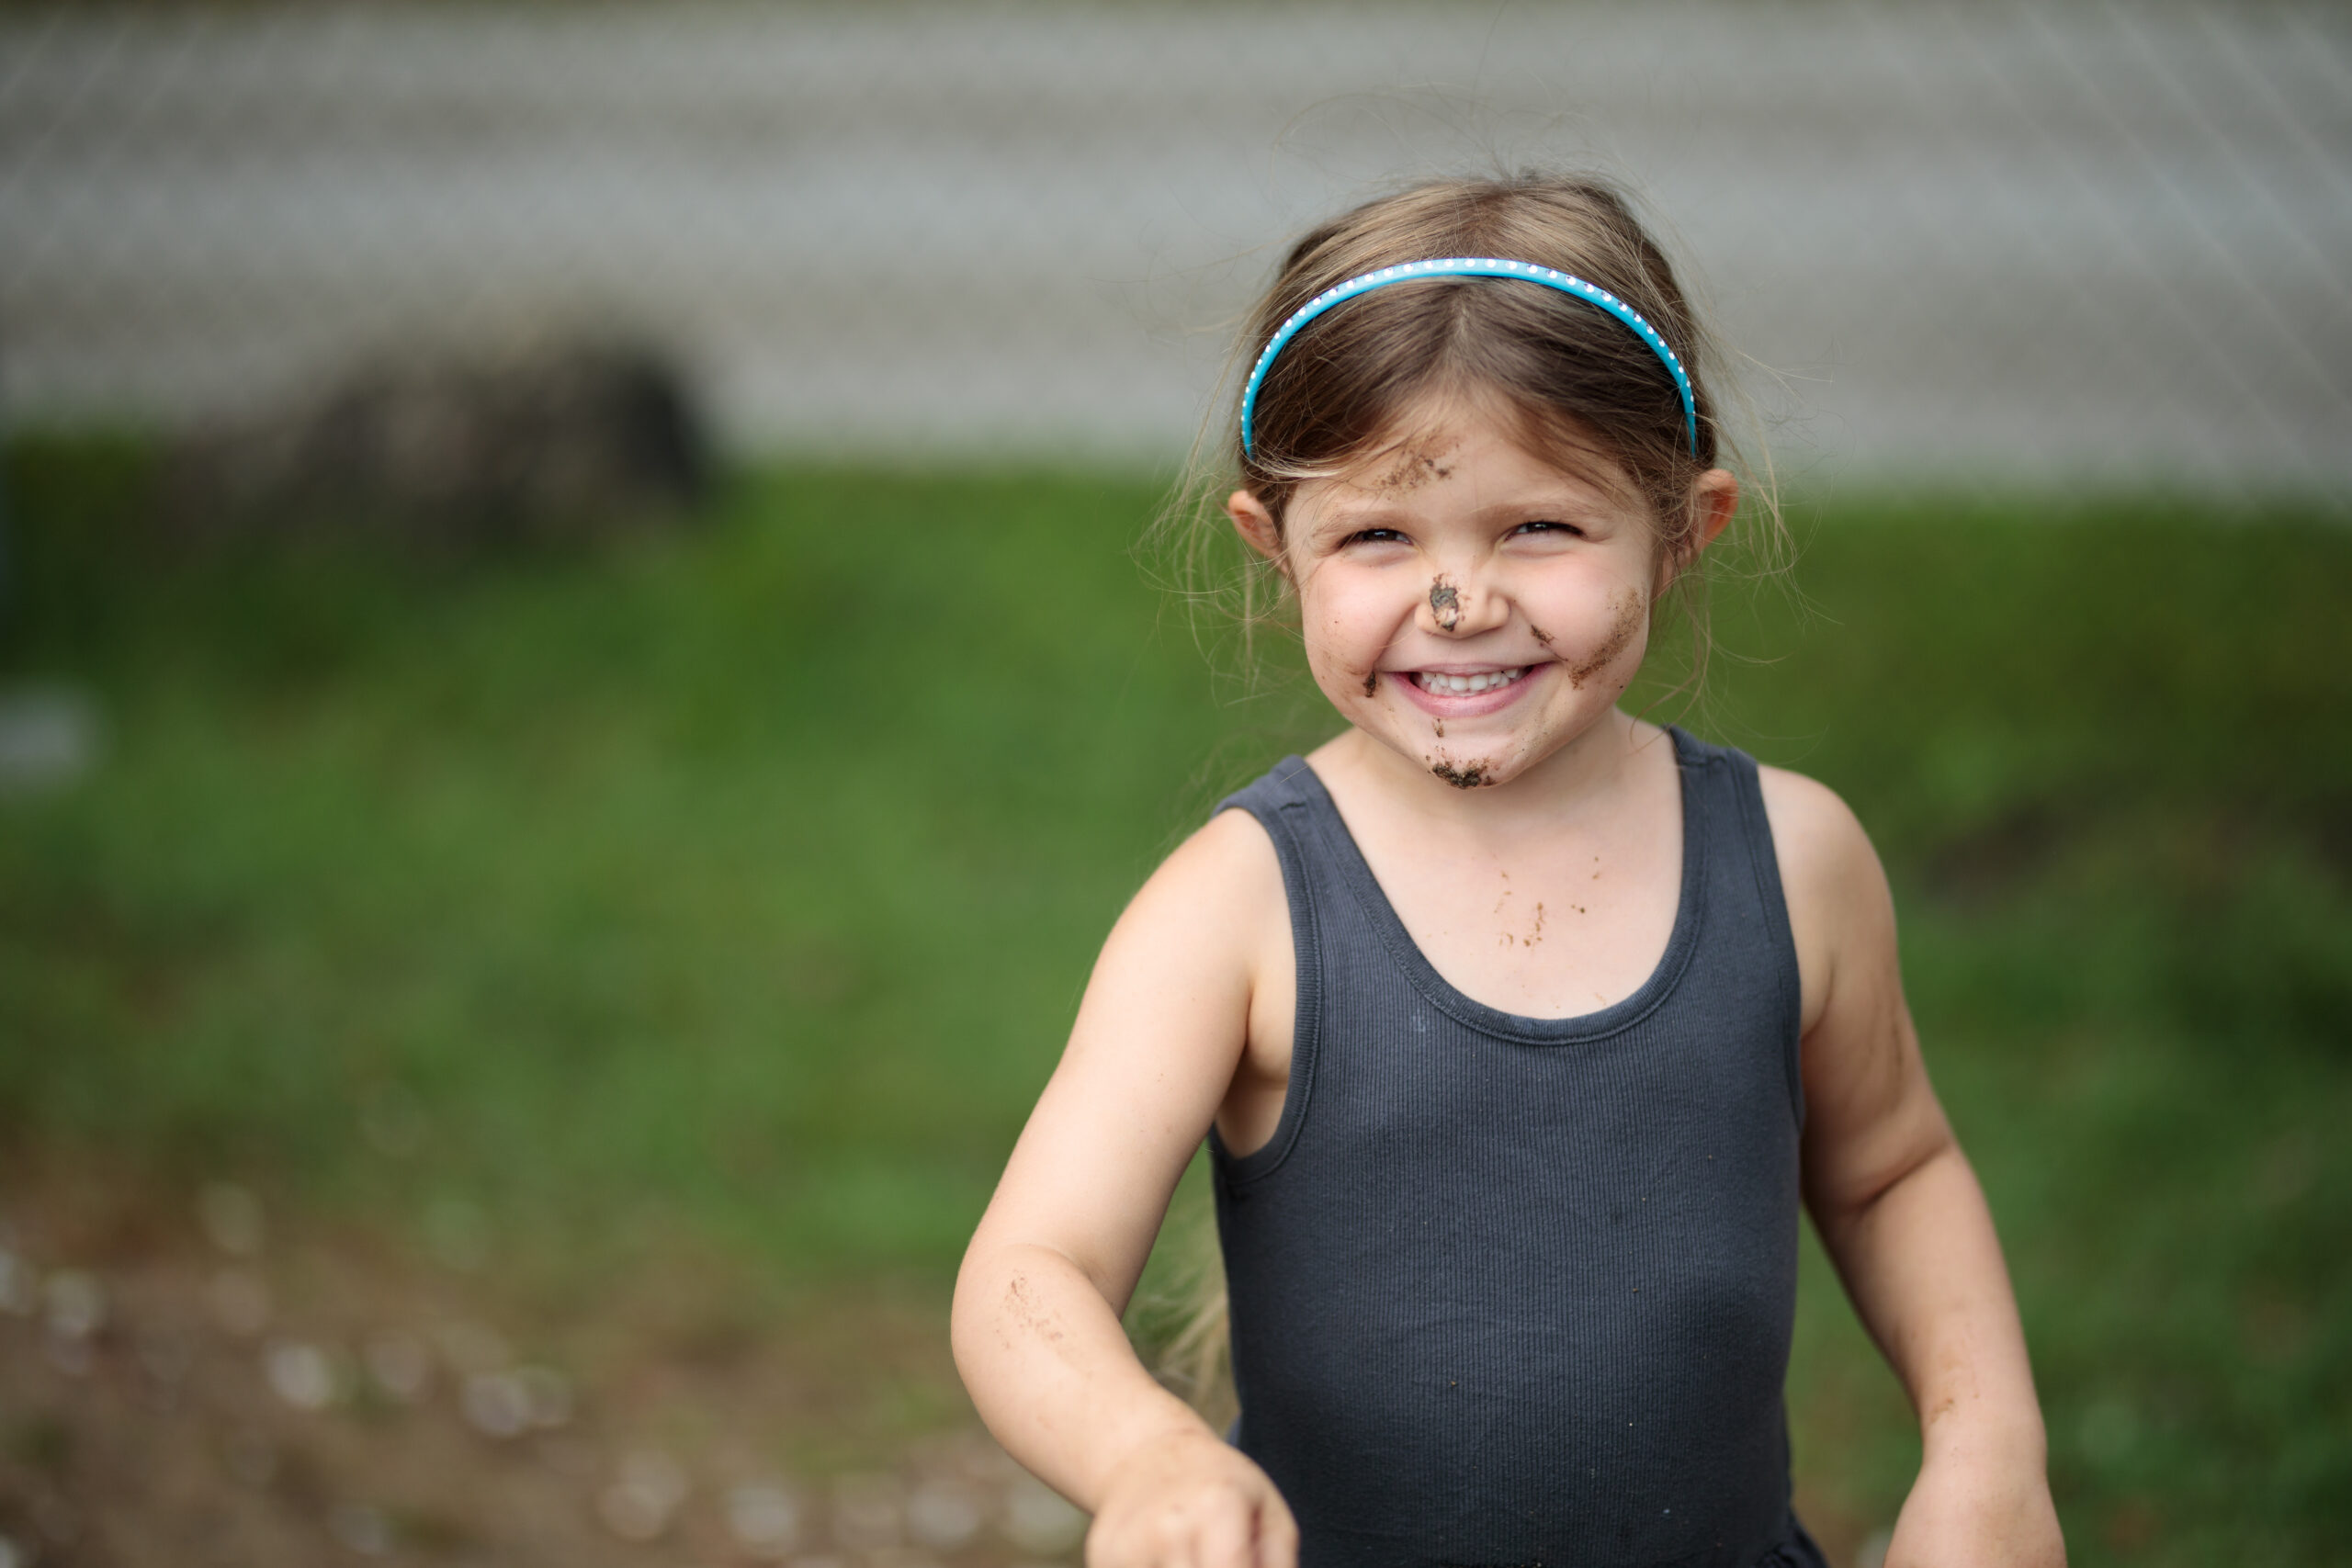 Little girl with gray tank top, blue headband, light skin, long brown hair stands outside and smiles with a big mud smudge on her nose